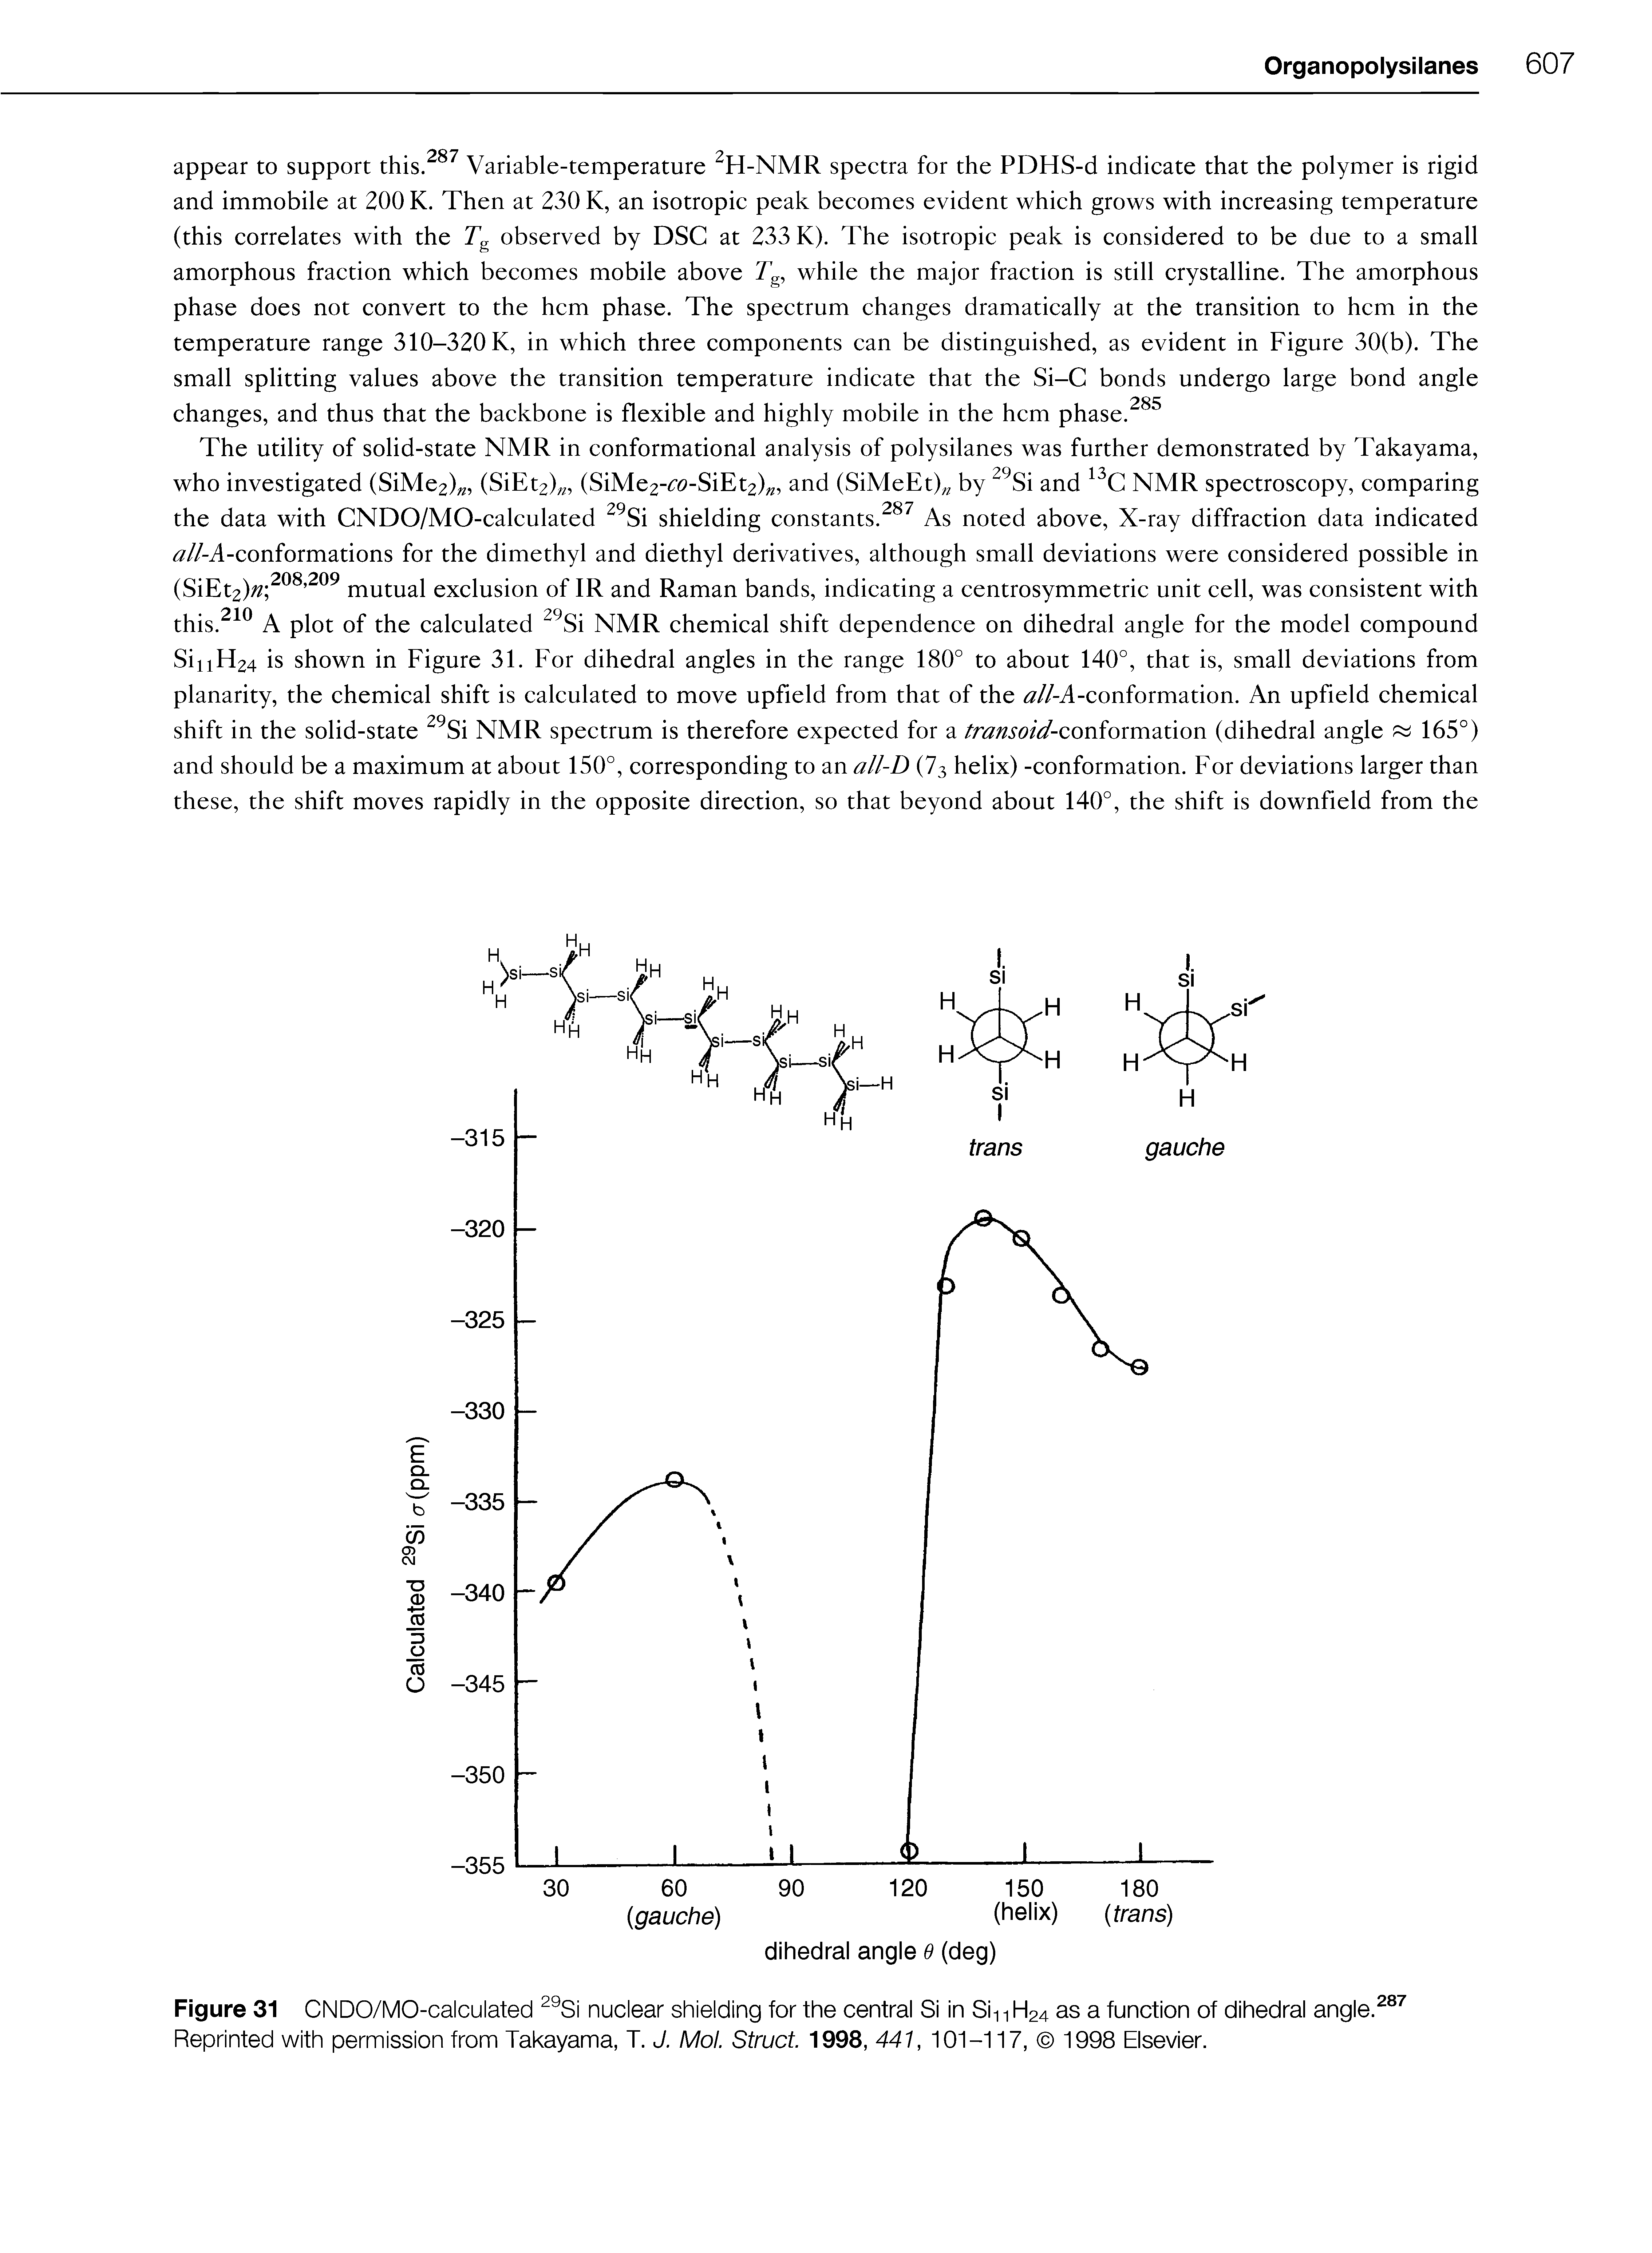 Figure 31 CNDO/MO-calculated 29Si nuclear shielding for the central Si in Si11H24 as a function of dihedral angle.287 Reprinted with permission from Takayama, T. J. Mol. Struct. 1998, 441, 101-117, 1998 Elsevier.